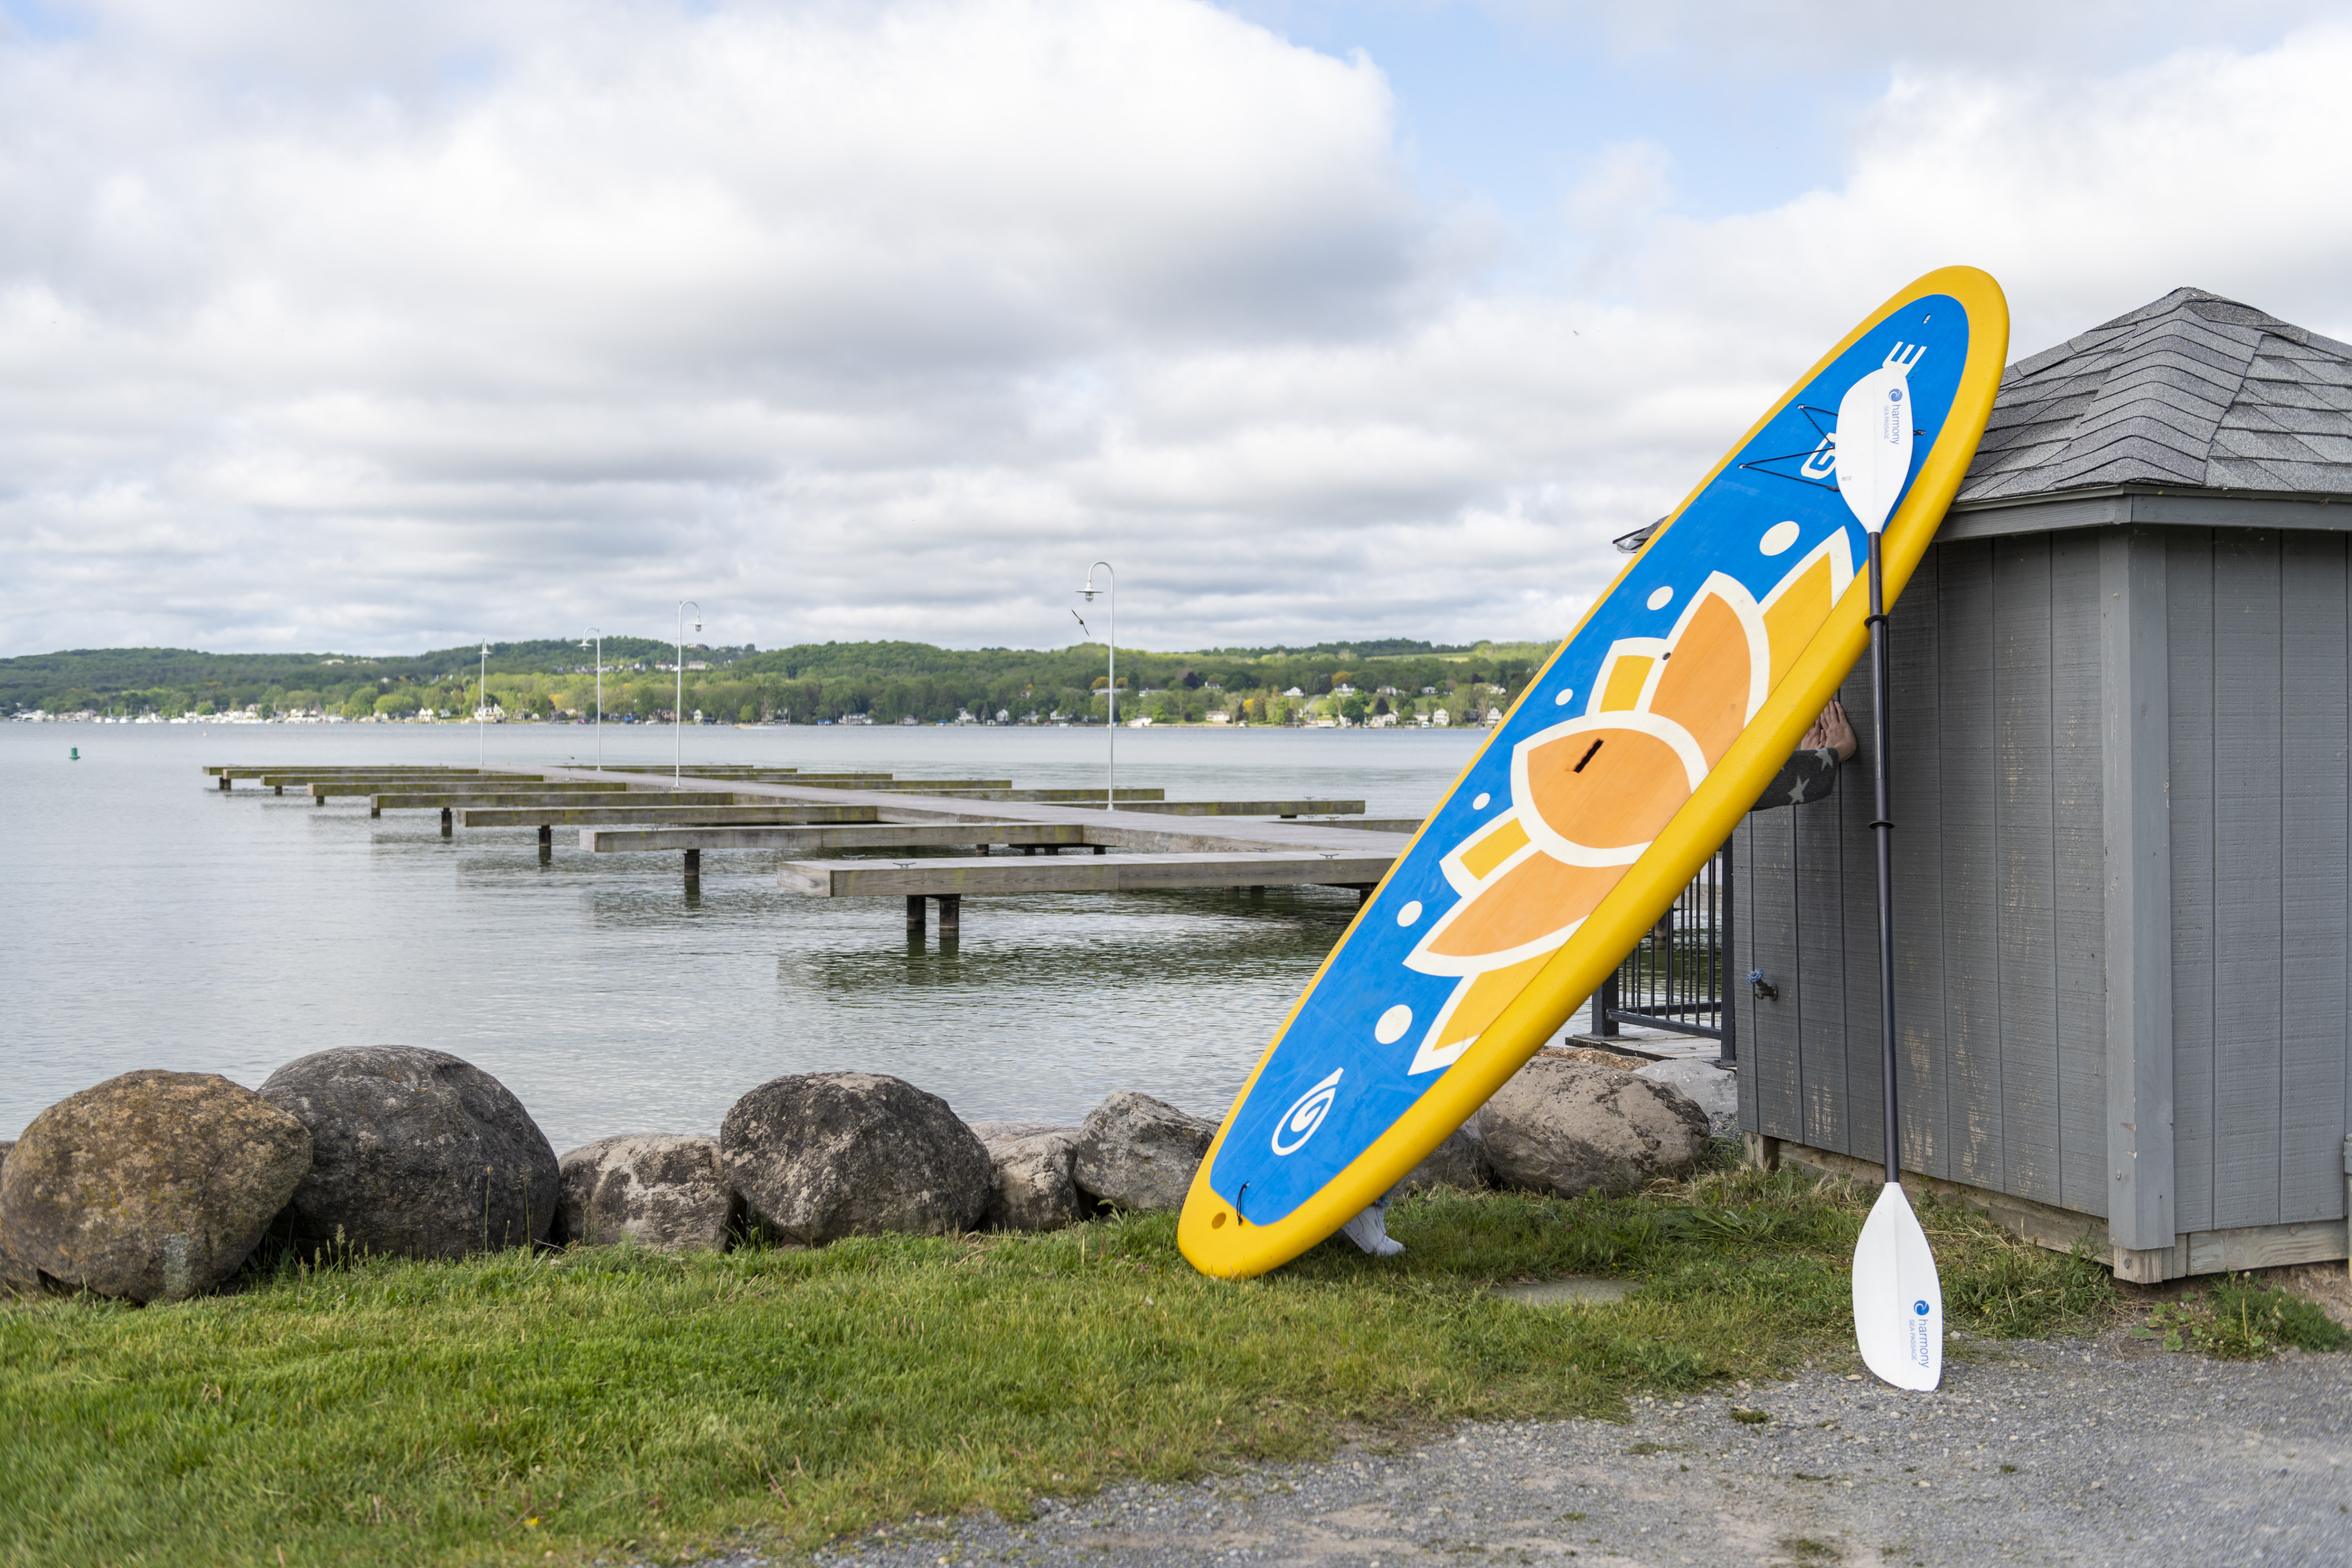 Surfboard and paddle by water